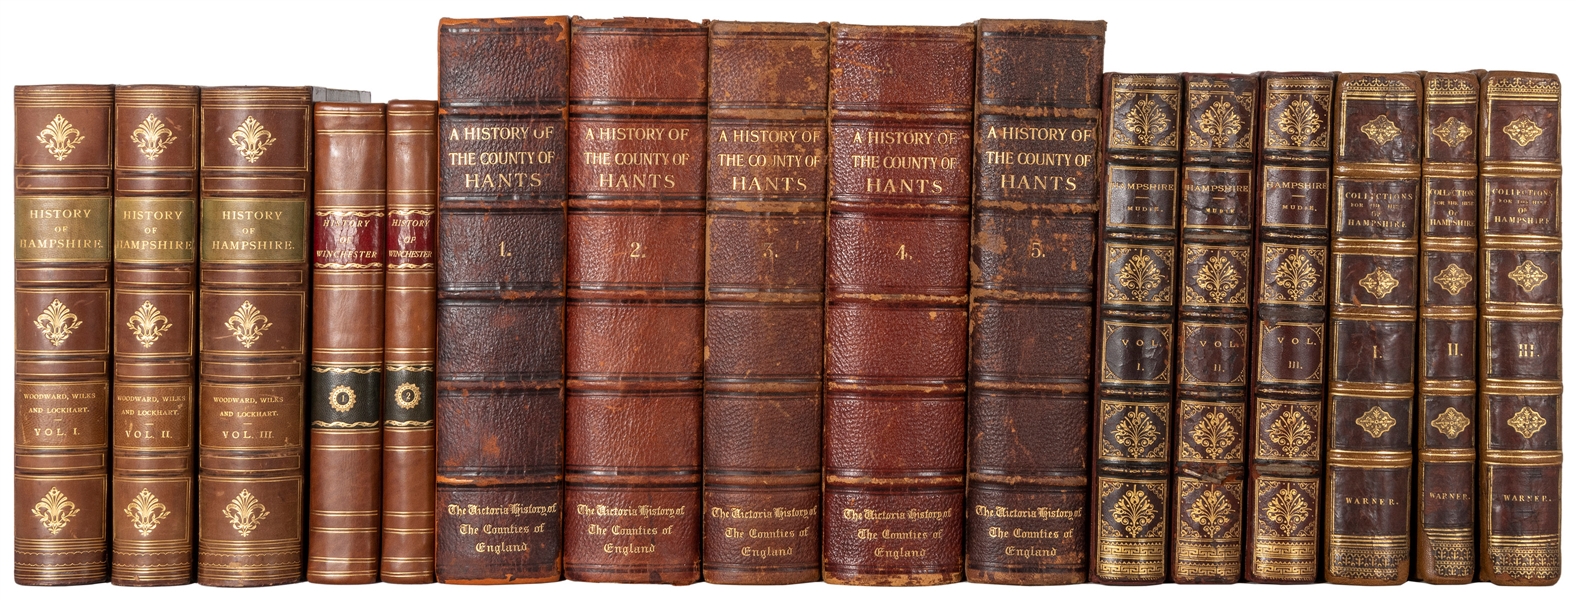  [HAMPSHIRE]. WARNER, Richard. Collections of the History of...